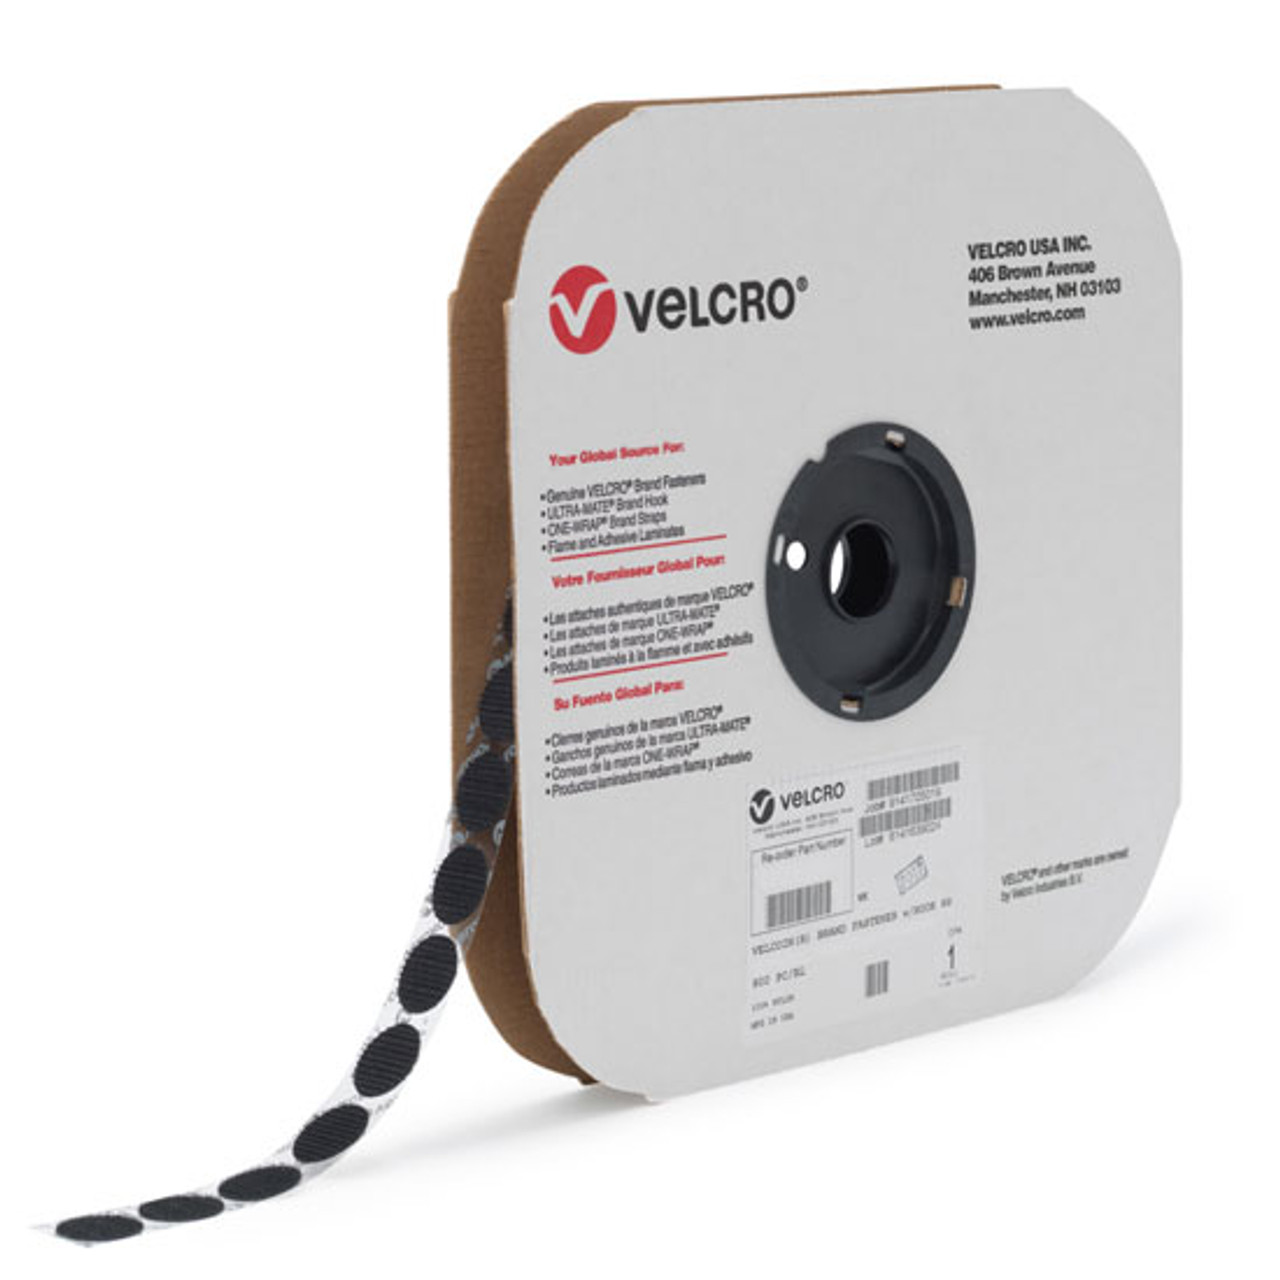 VELCRO® Brand Adhesive Tape 1/2 x 25 yards sold by INDUSTRIAL WEBBING CORP